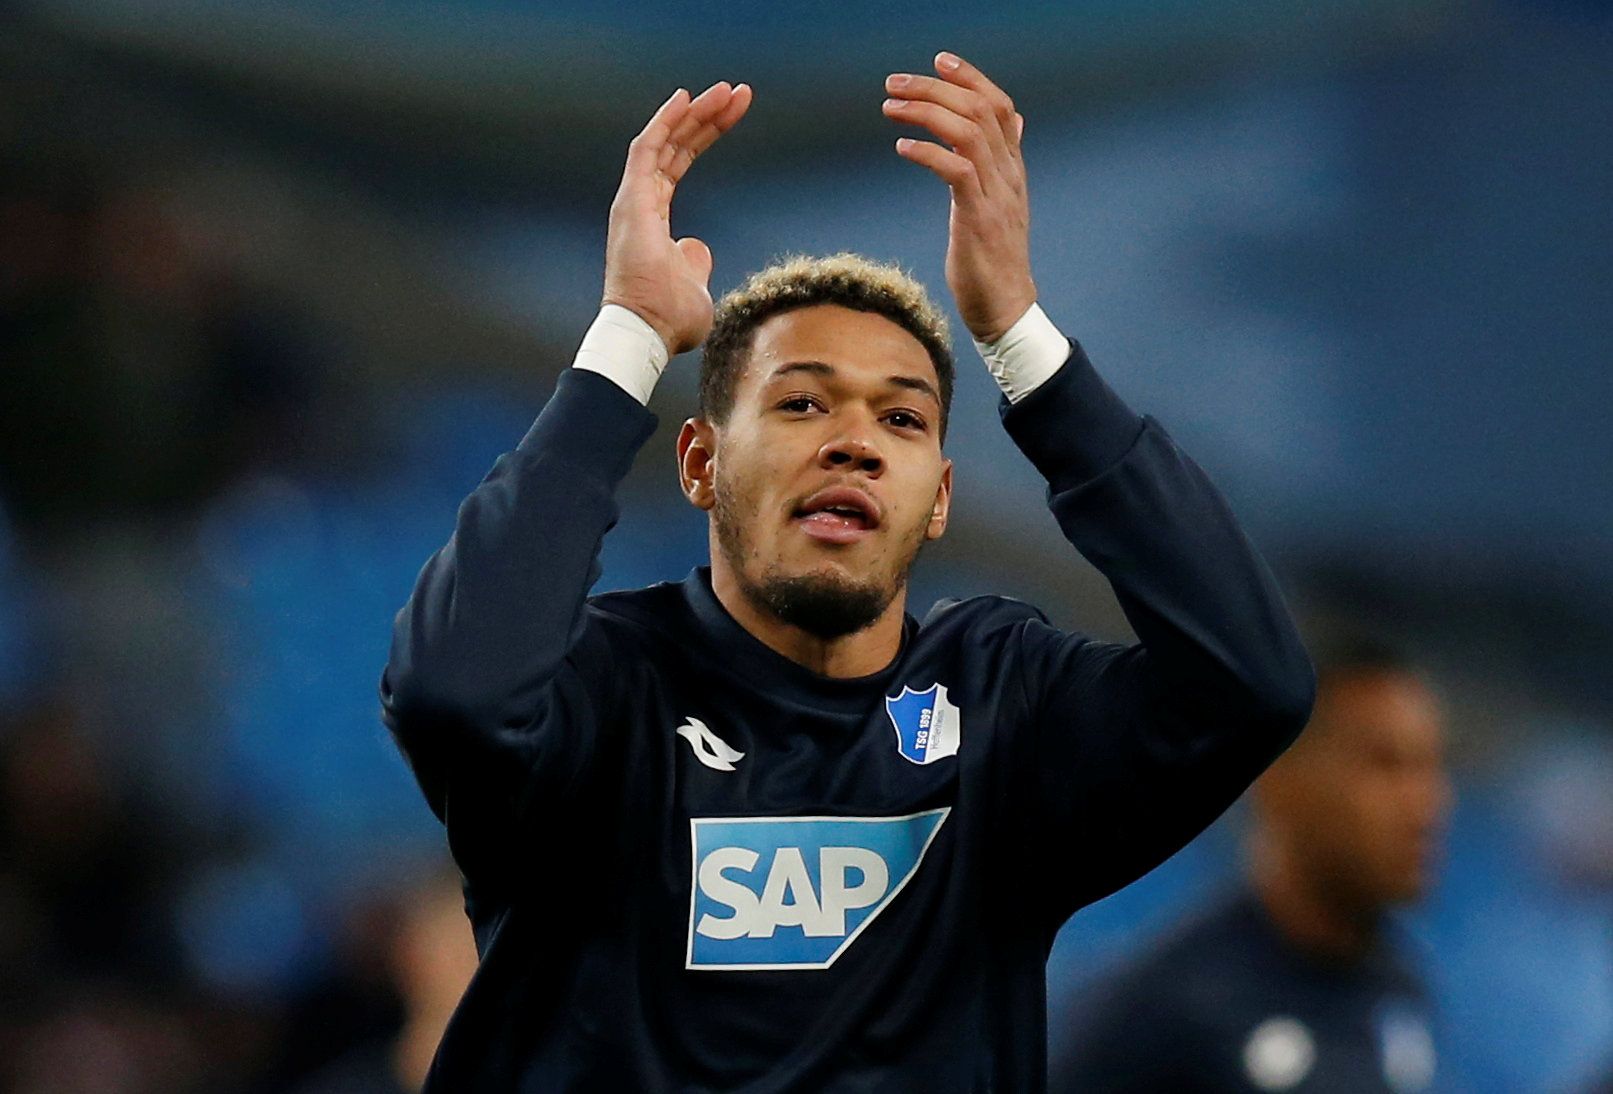 Soccer Football - Champions League - Group Stage - Group F - Manchester City v TSG 1899 Hoffenheim - Etihad Stadium, Manchester, Britain - December 12, 2018  Hoffenheim's Joelinton during the warm up before the match   REUTERS/Andrew Yates